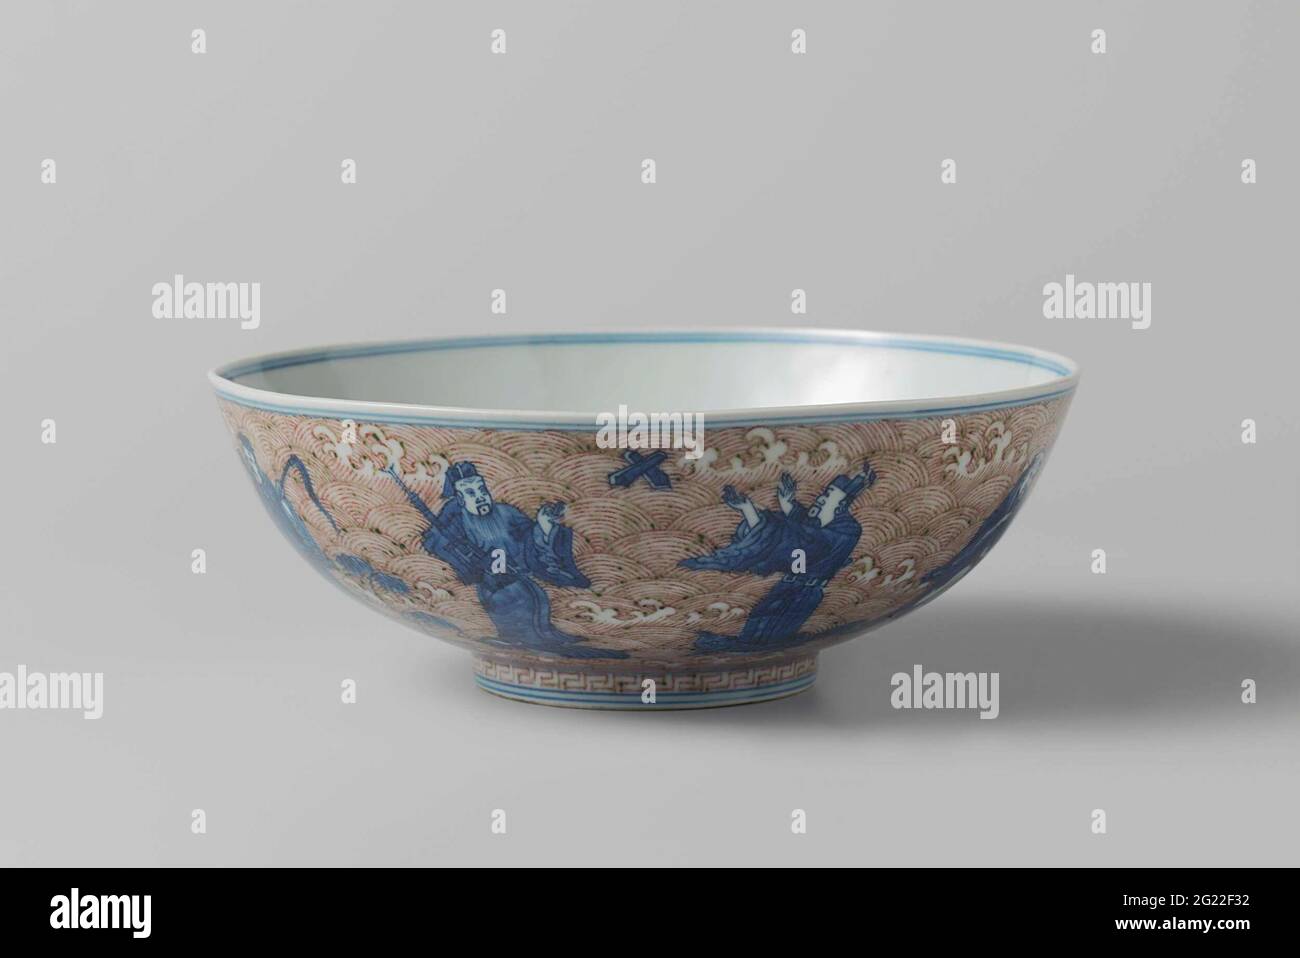 Bowl with the Eight Immortals and Shoulao. Bowl of porcelain with flared wall, painted in underglaze blue and red. On the outside the eight immortals standing on marine animals, against a background of foamy waves; On the bottom shoulao with a deer with a mushroom in his mouth against a background of foamy waves and clouds; Around the foot ring a decorative border with Meander motif. On the underside the six character mark Chenghua in a double circle and an old label with 'Marked Ching-Hua period 1465-1488 1888 A. Stapnell'. Middle blue with copper red. Stock Photo